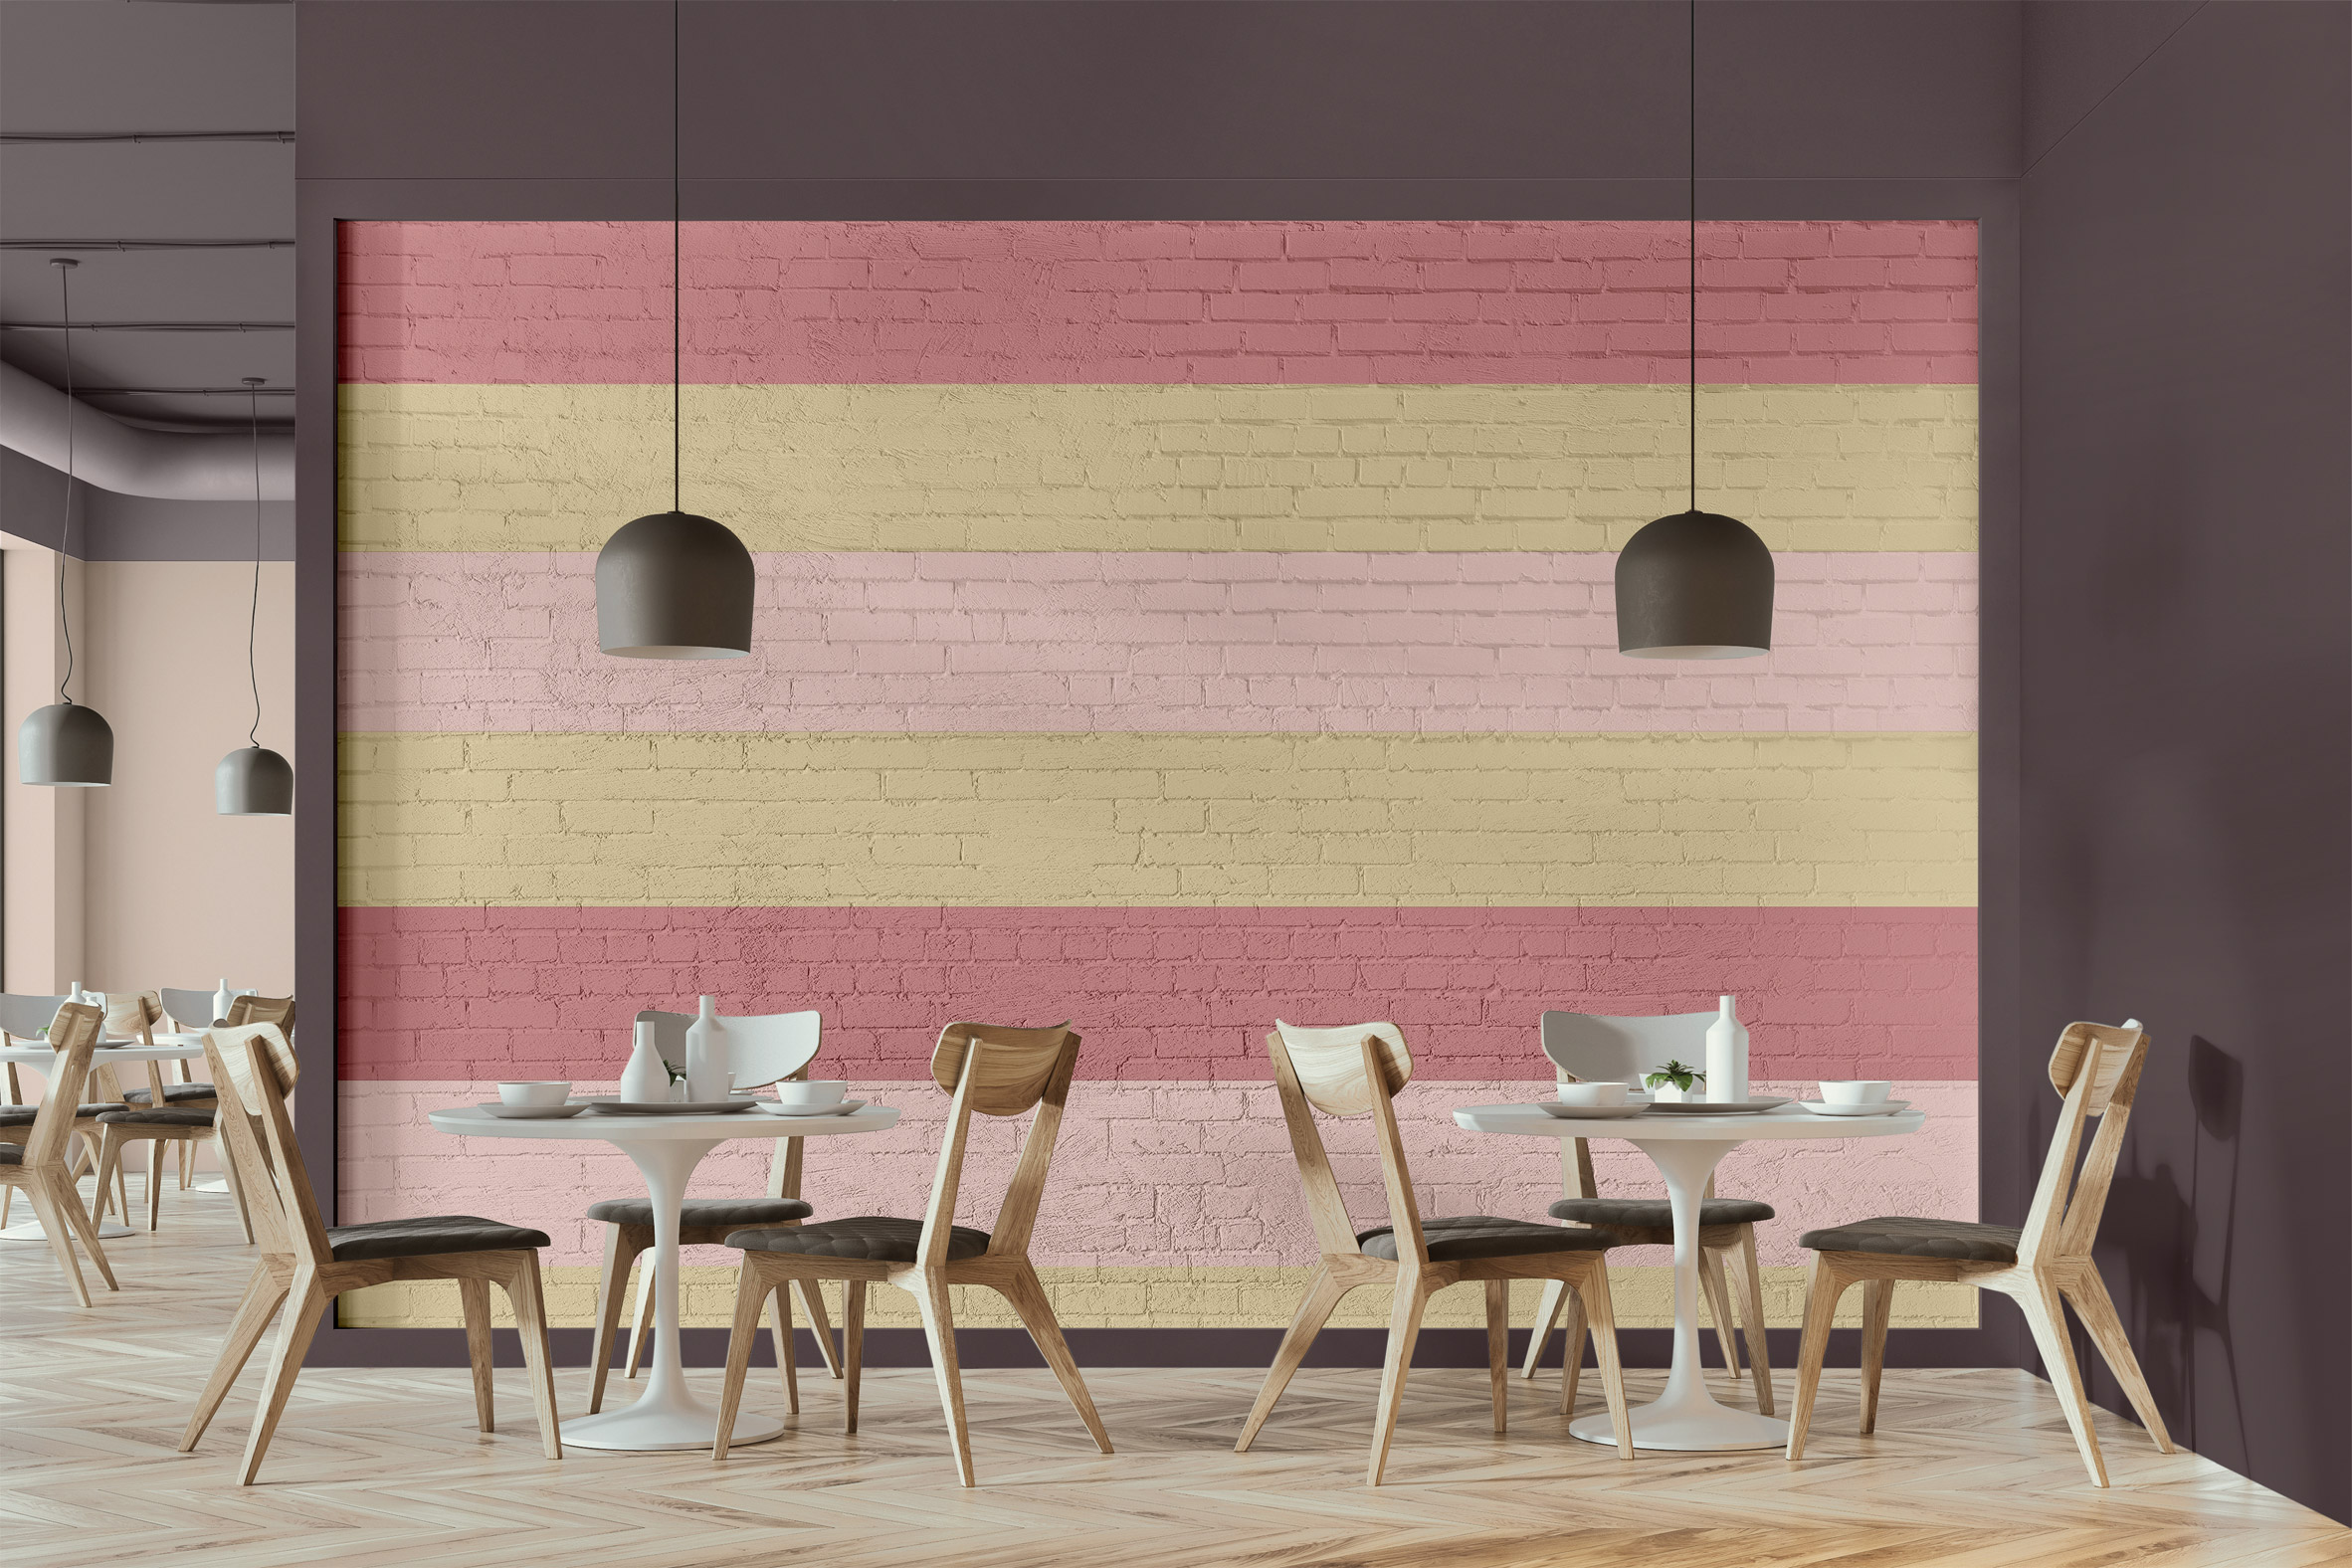 A pink and yellow wall in a cafe